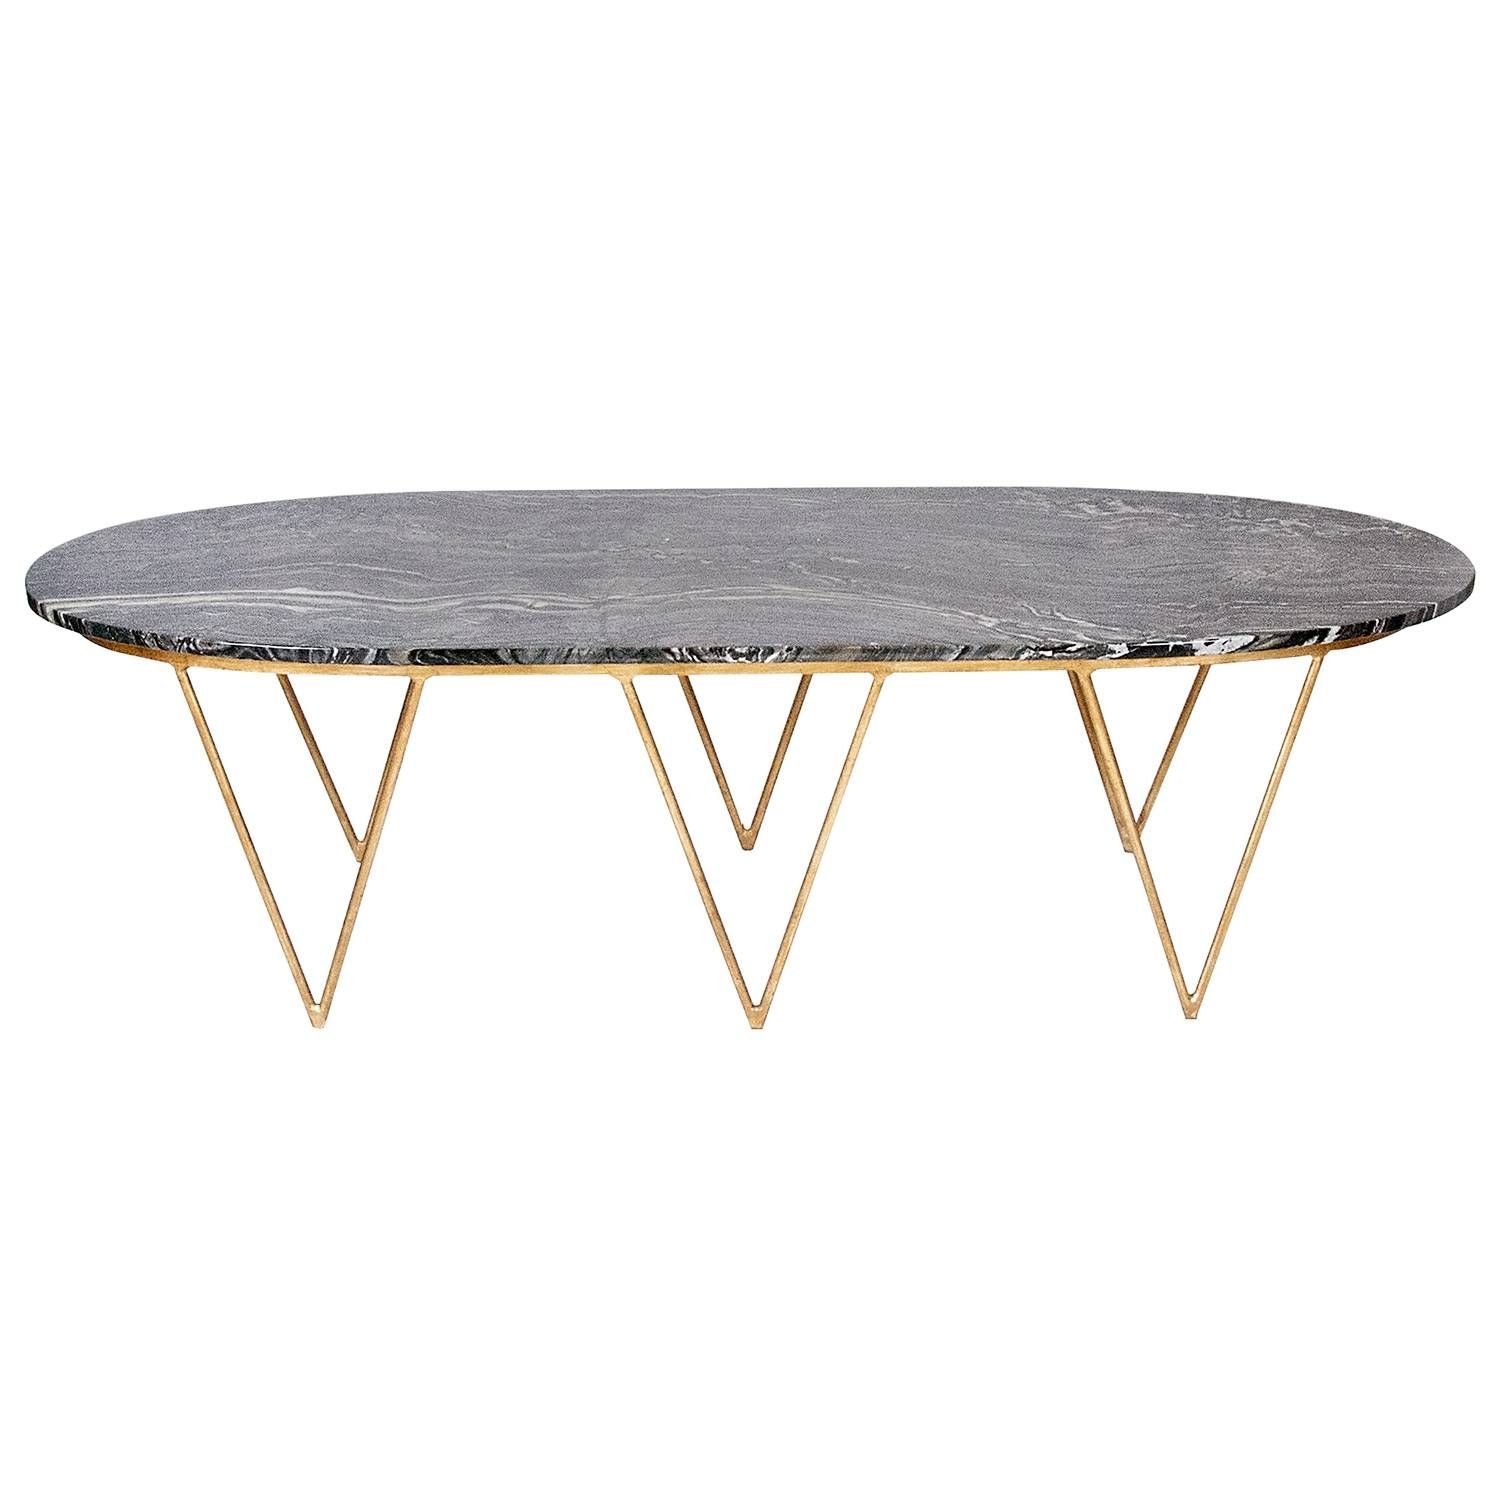 Worlds Away Surf Gold Leafed Coffee Table Black Marble Top Intended For Black And Grey Marble Coffee Tables (View 20 of 30)